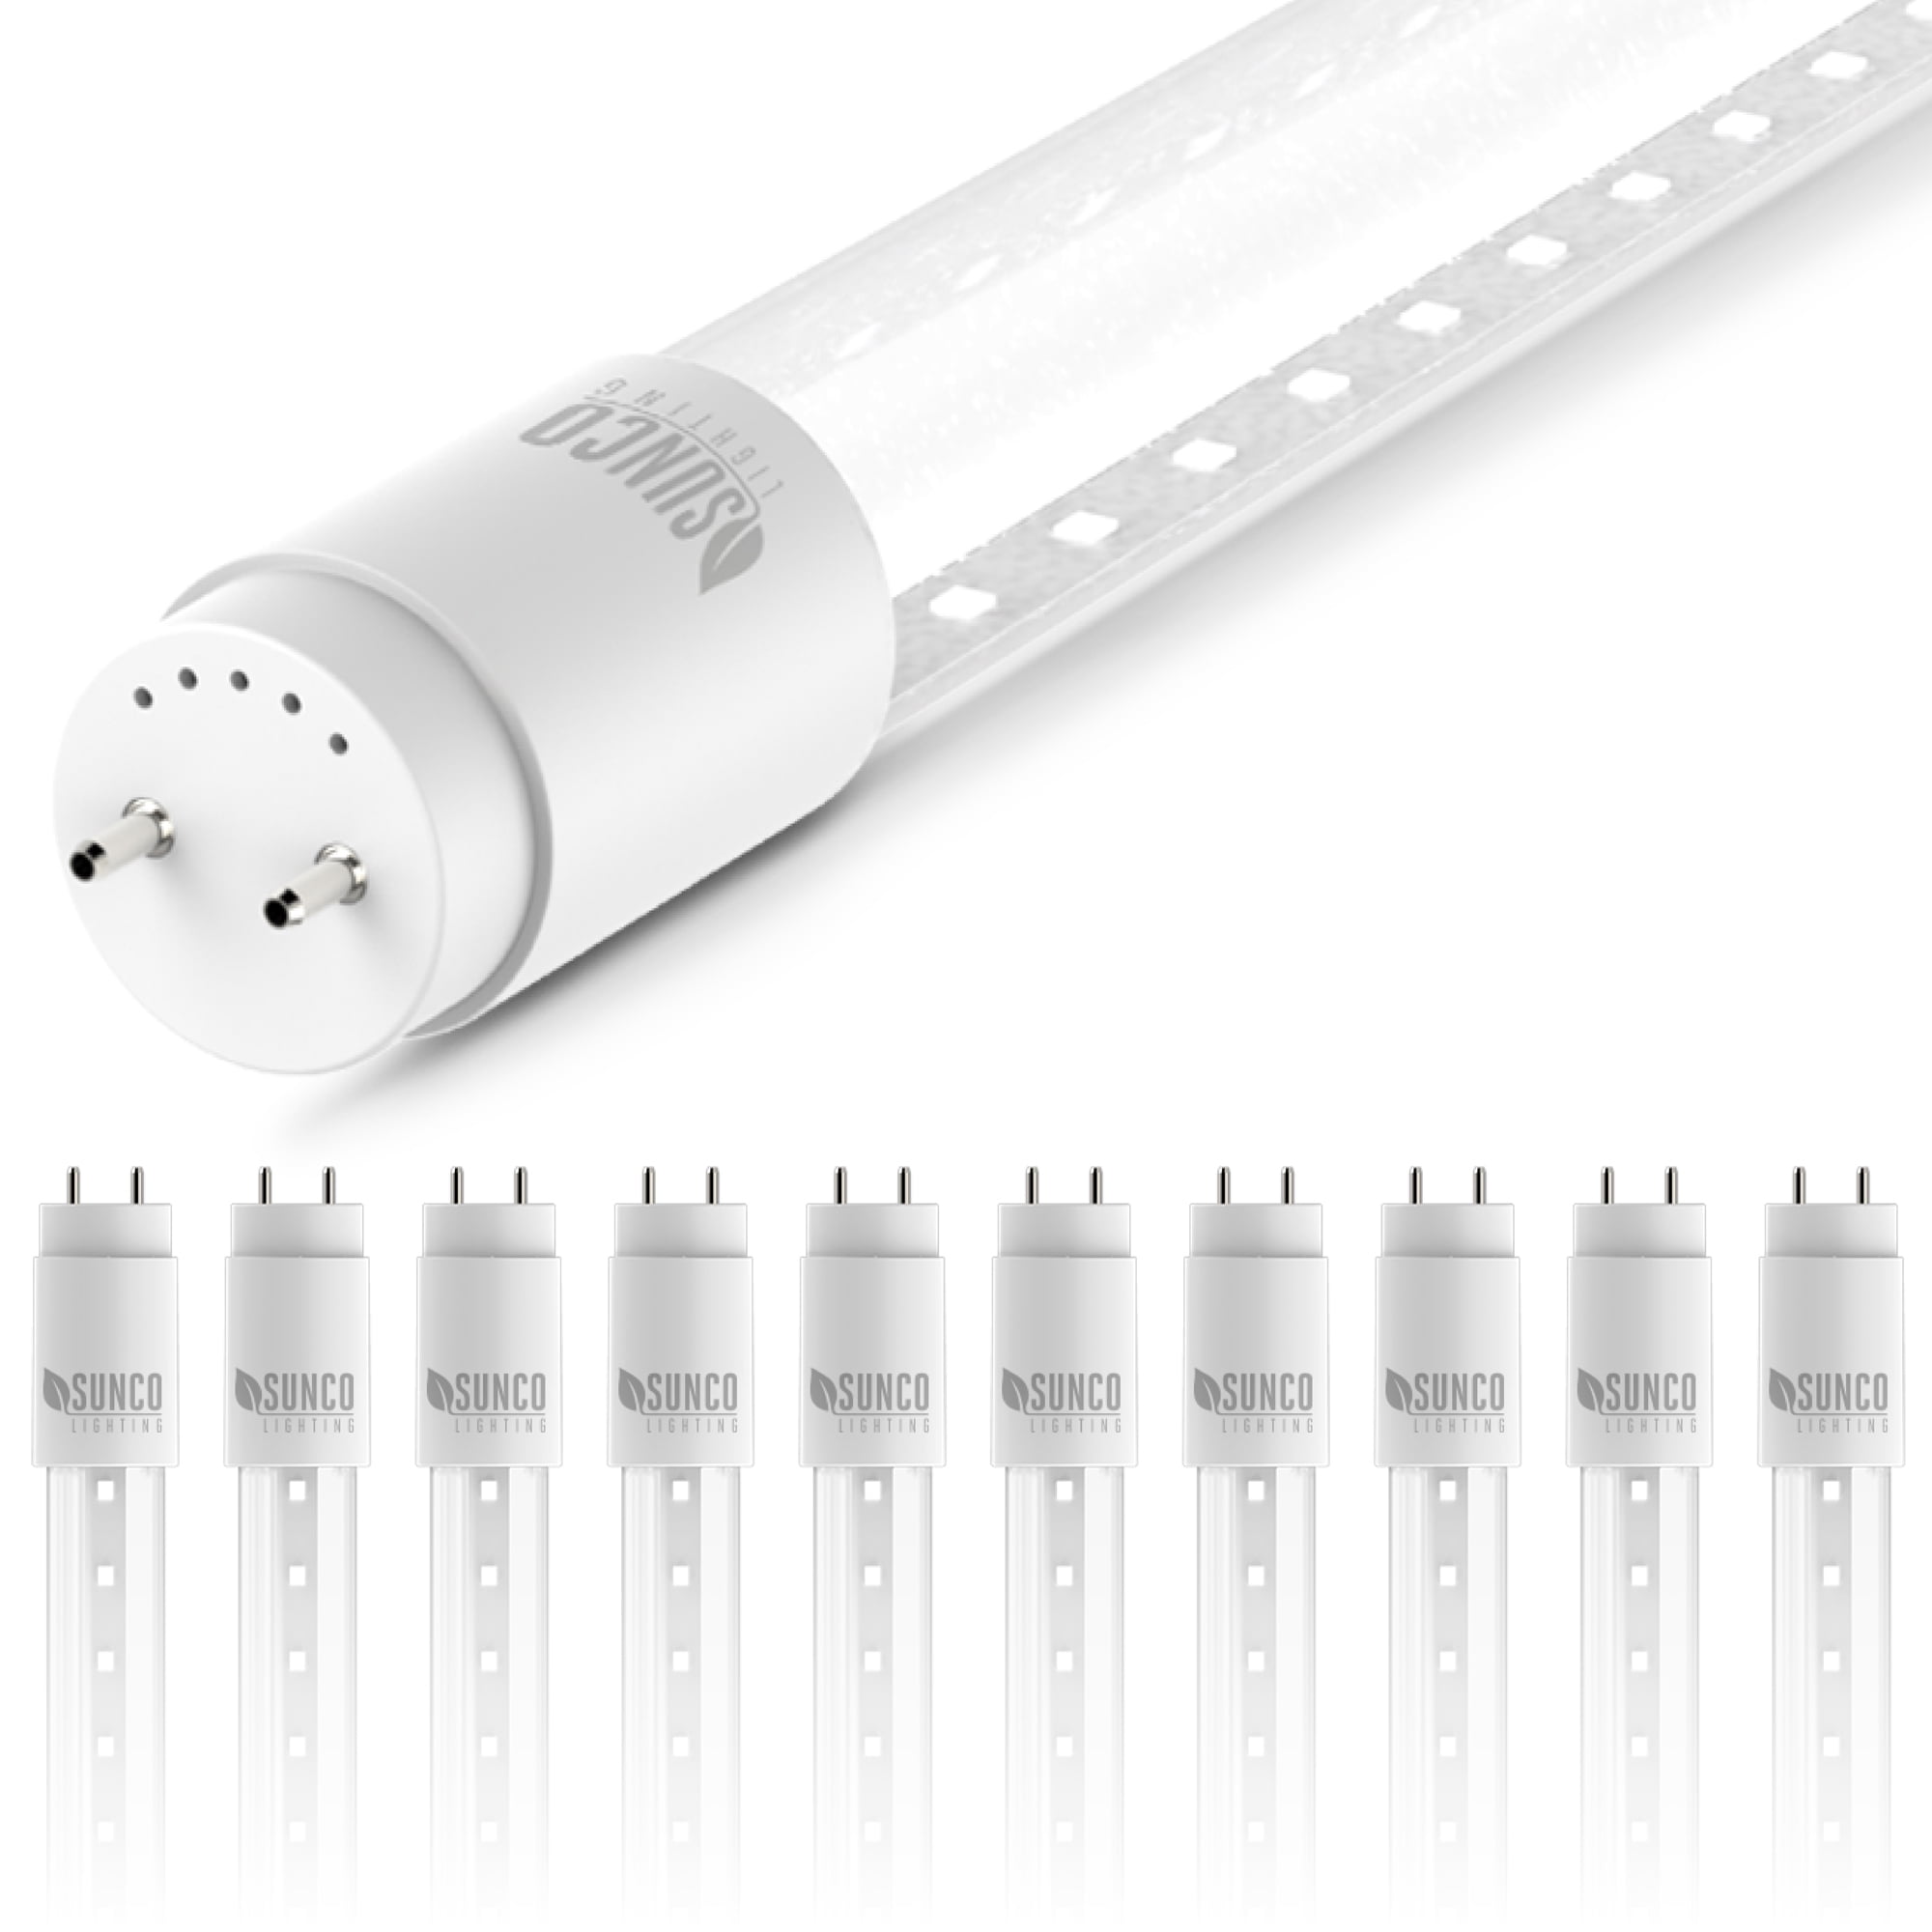 Commercial Grade Ballast Bypass Clear Cover UL Listed Sunco Lighting 10 Pack 4FT T8 LED Tube 18W=40W Fluorescent 6000K Daylight Deluxe Single Ended Power SEP 